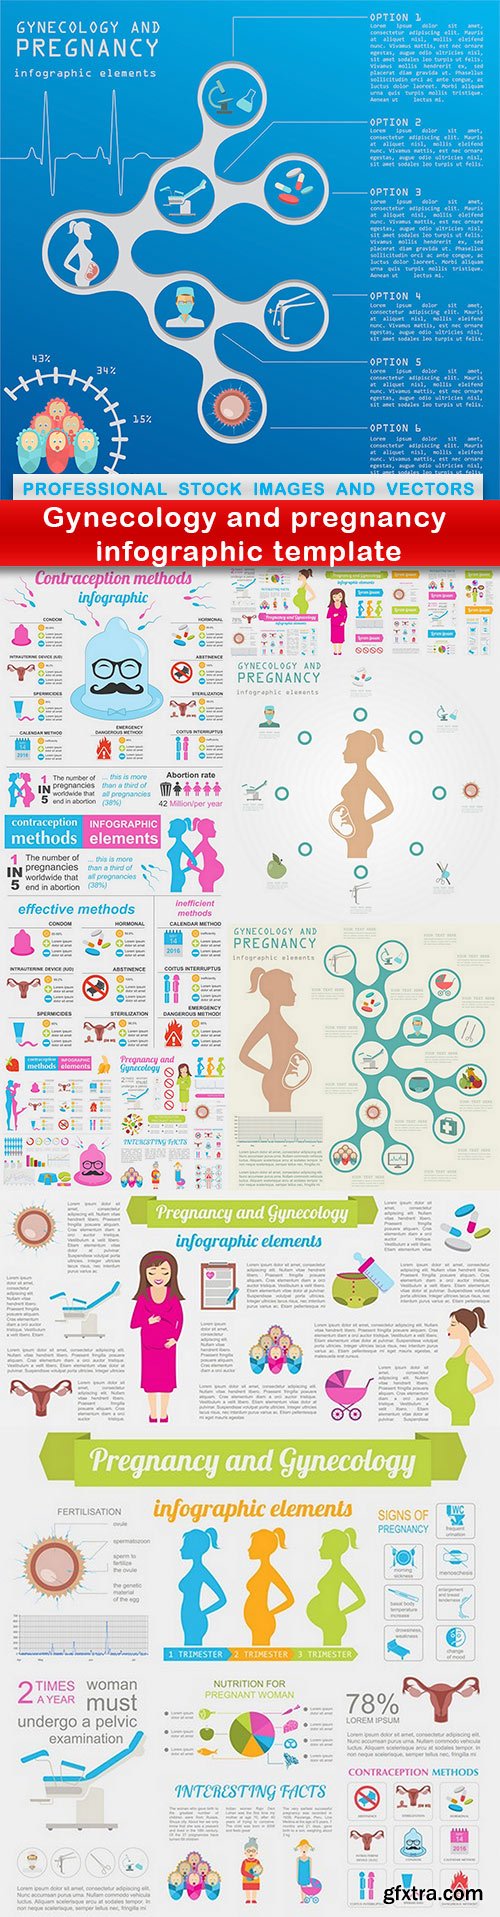 Gynecology and pregnancy infographic template - 11 EPS